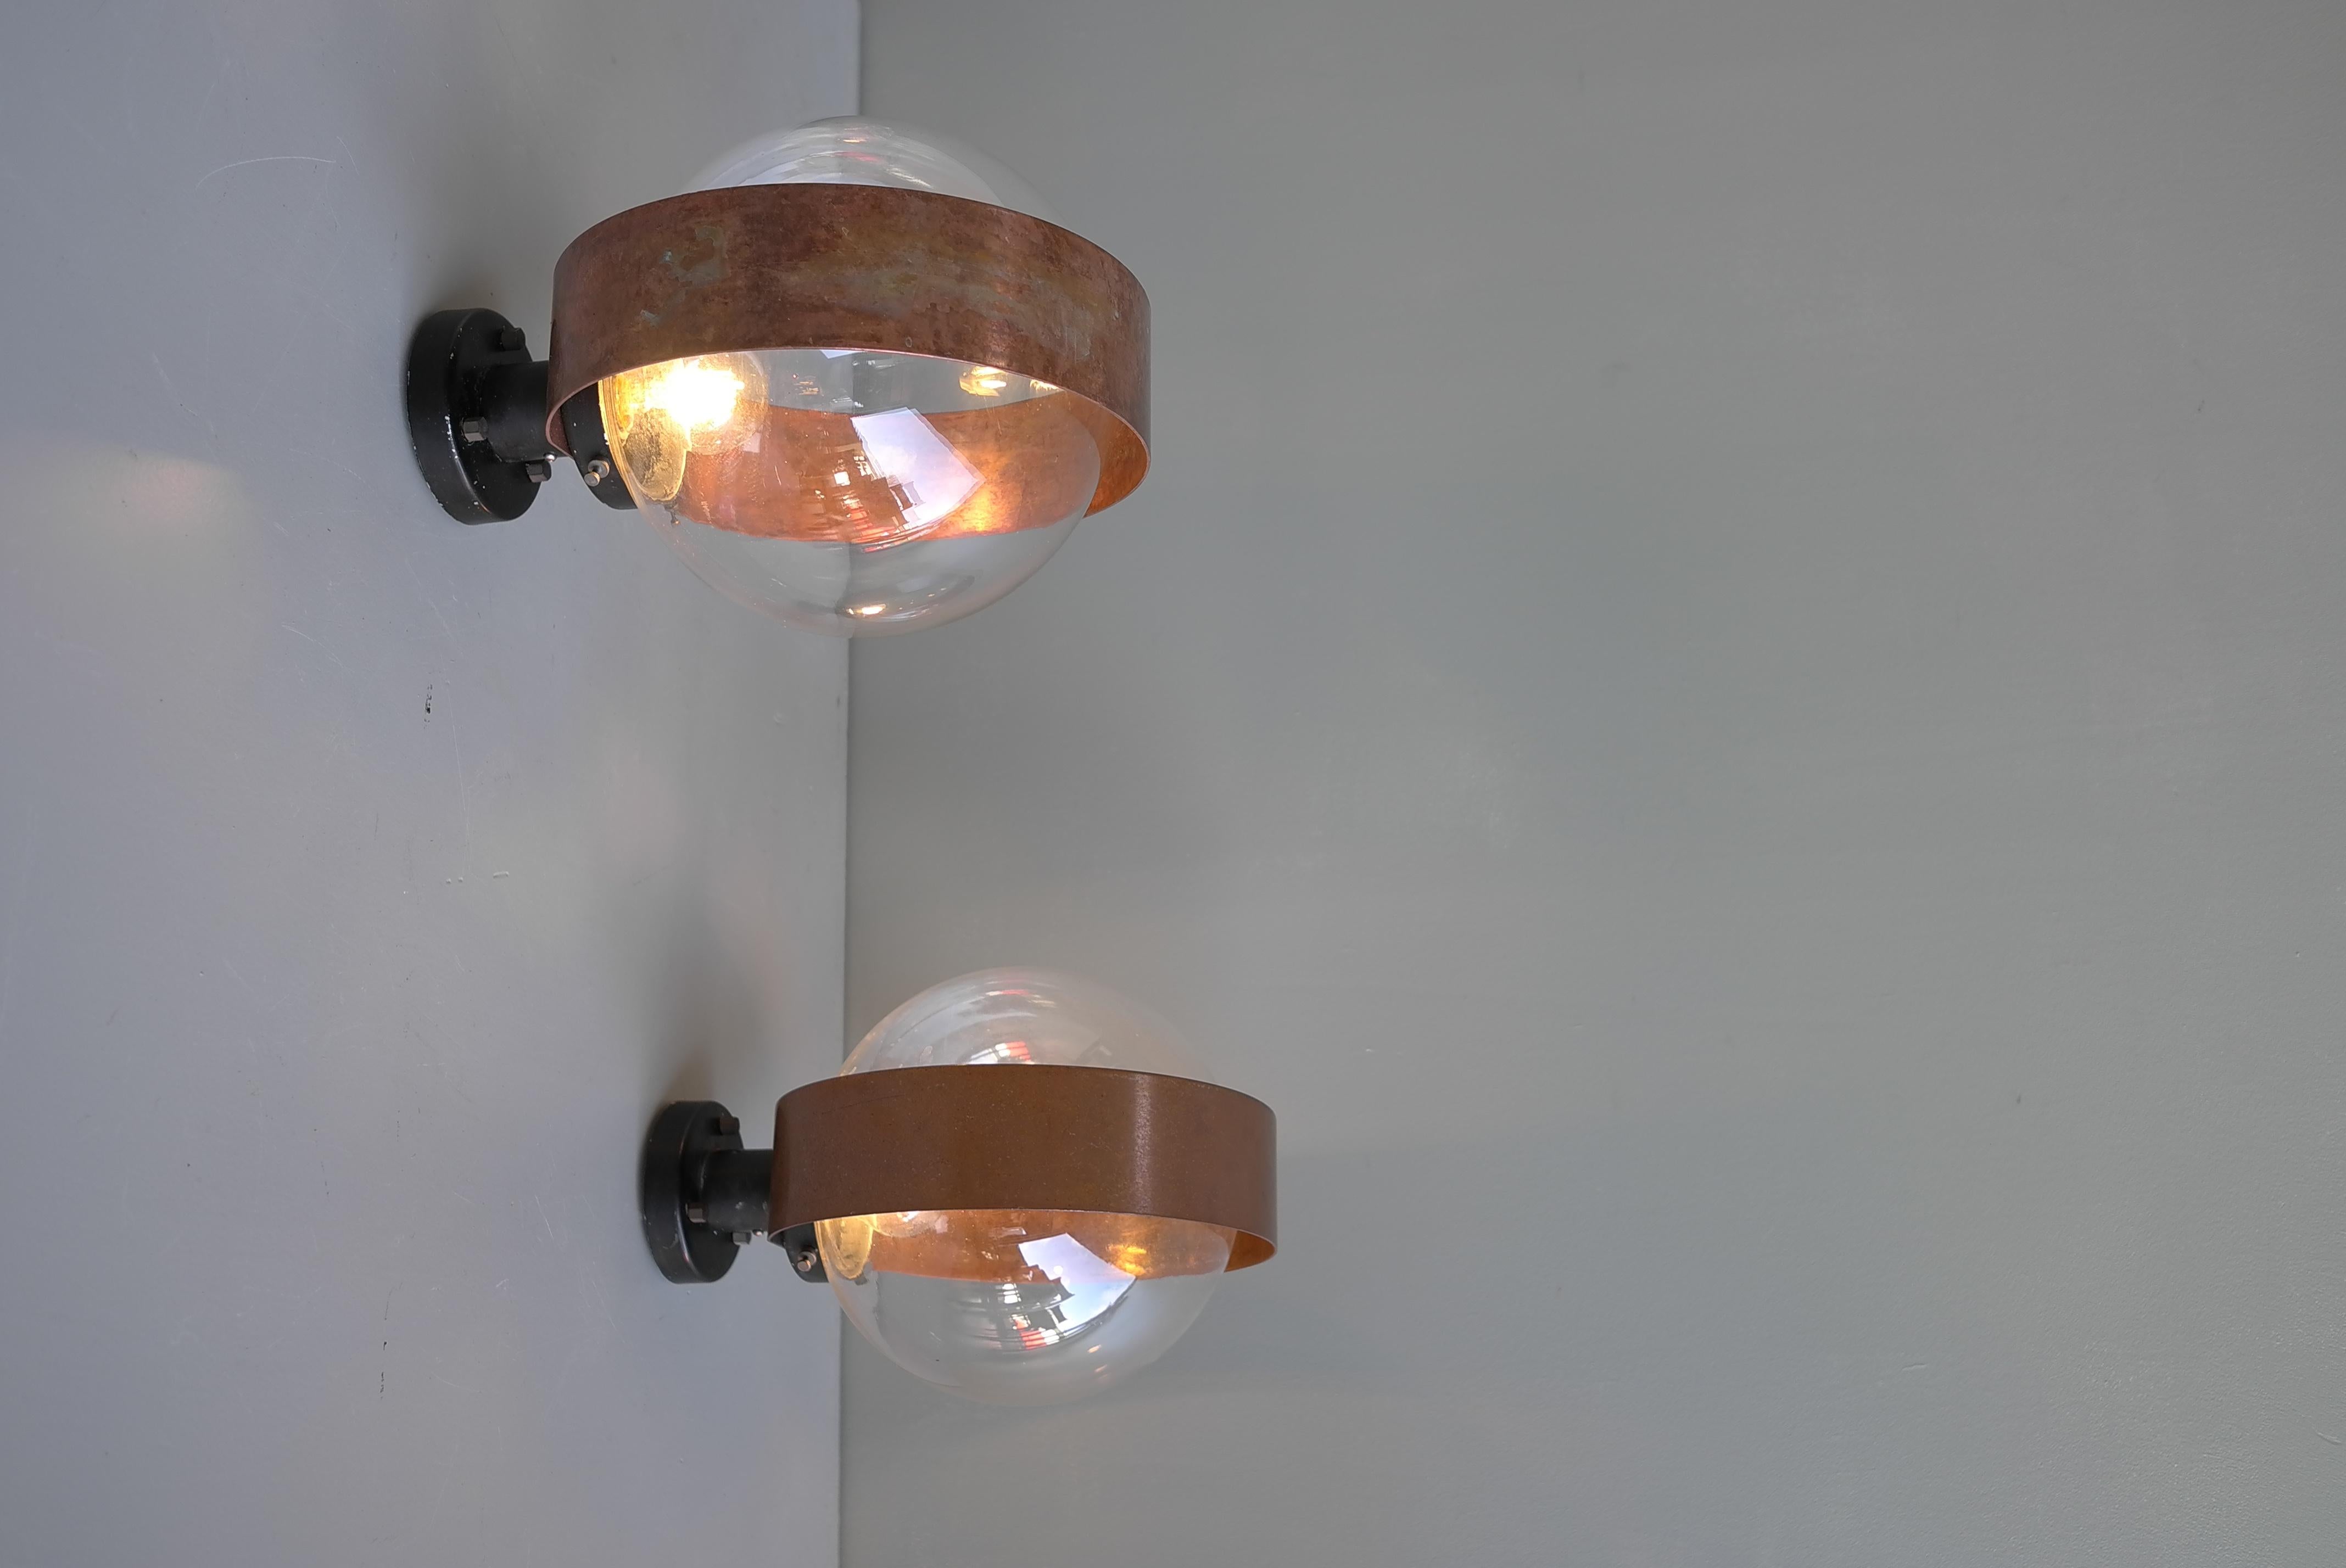 Pair of Scandinavian Glass Ball Wall lamps with Copper Patina Rims, 1960's For Sale 14